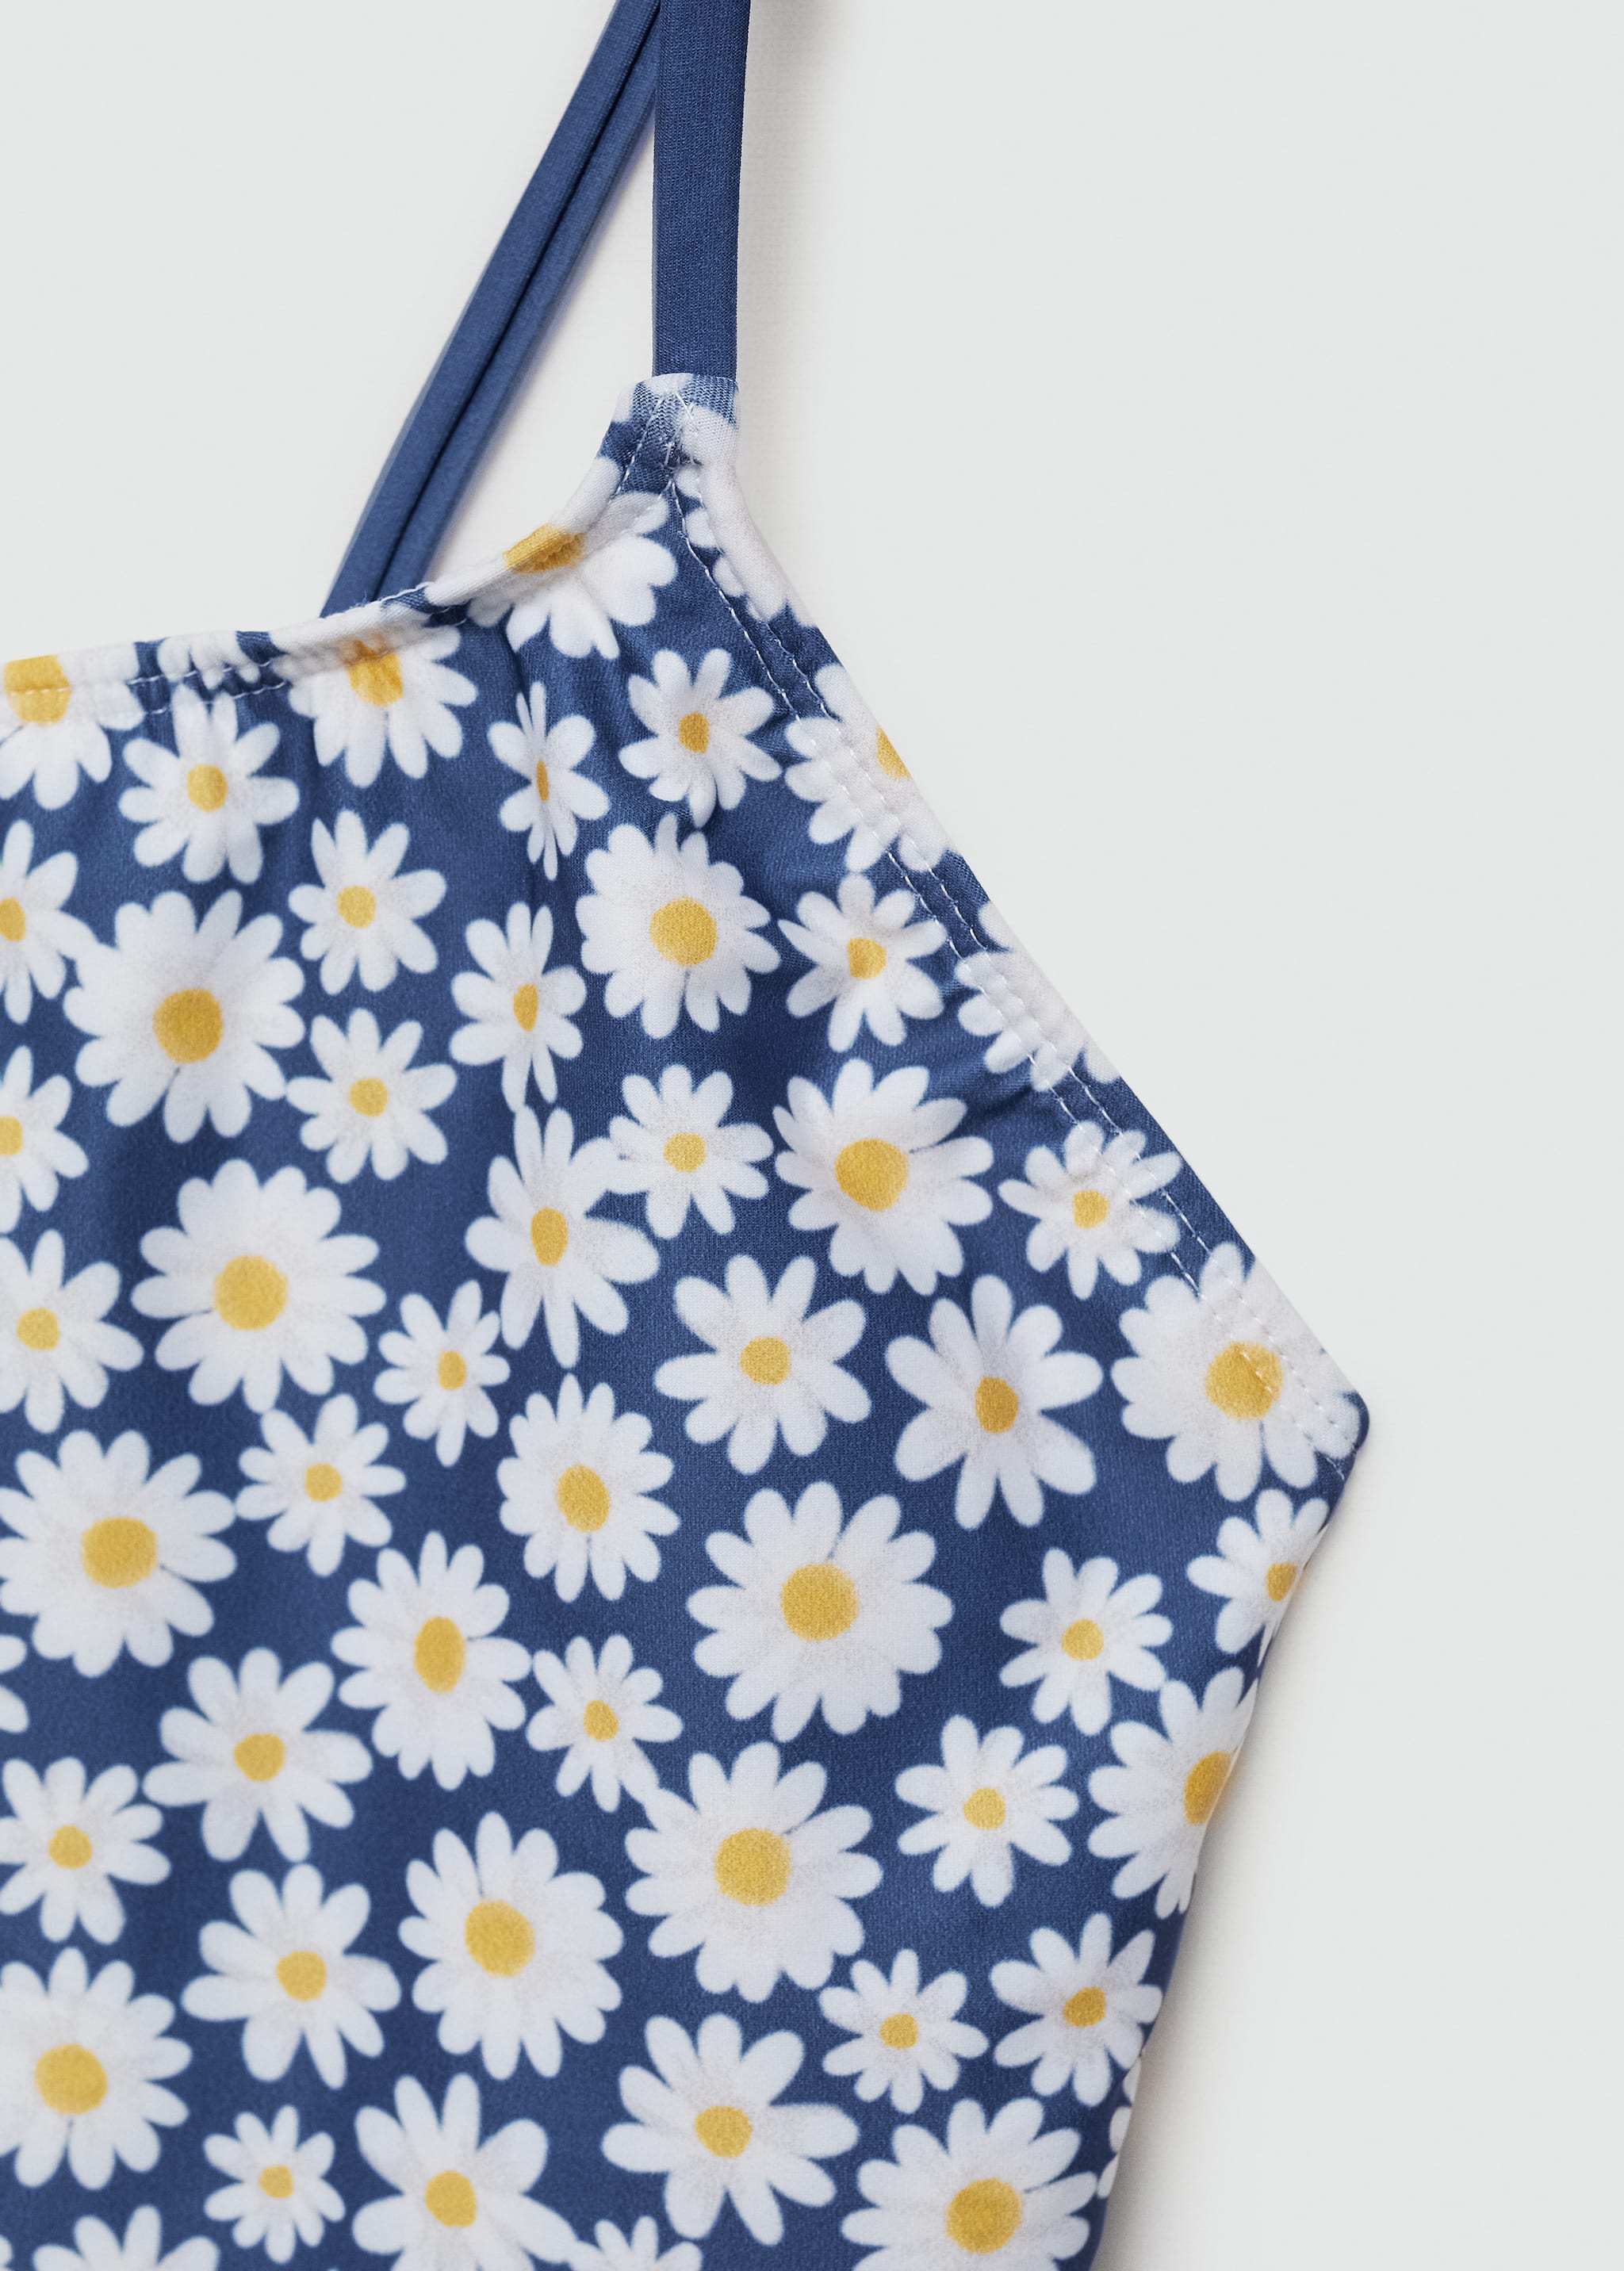 Daisy print swimsuit - Details of the article 8